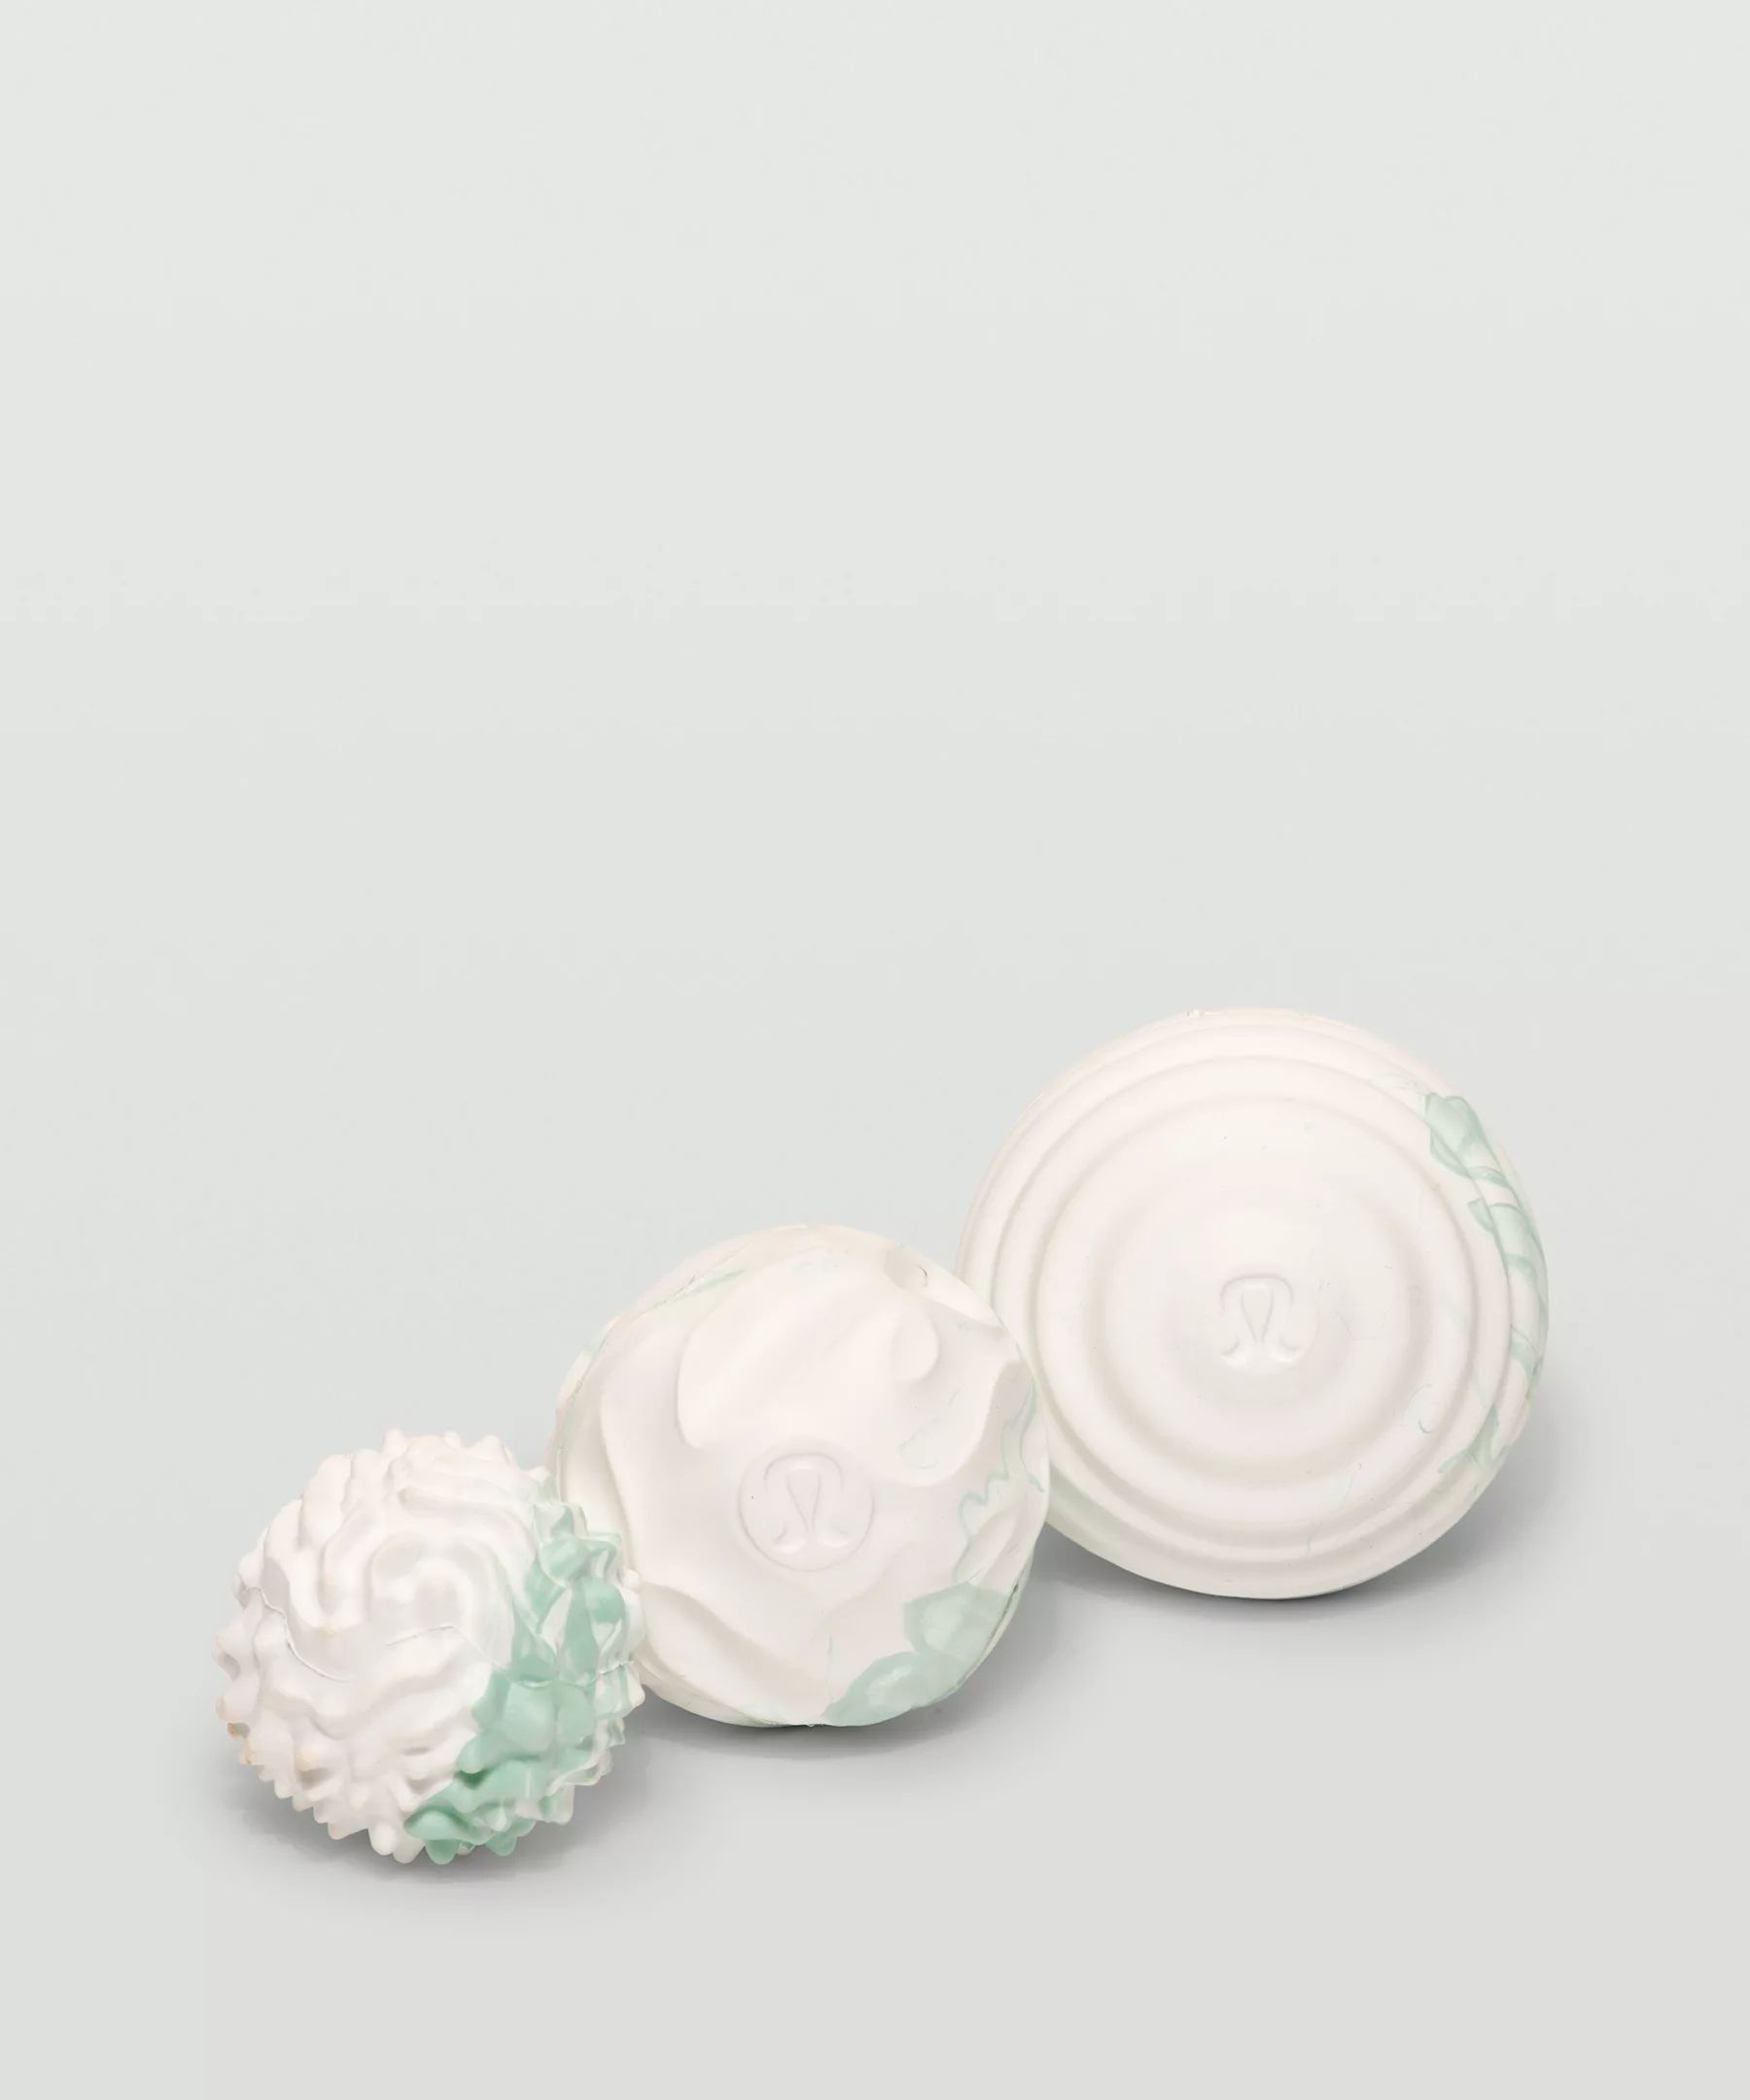 Release and Recover Ball Set | Yoga Accessories | lululemon | Lululemon (US)